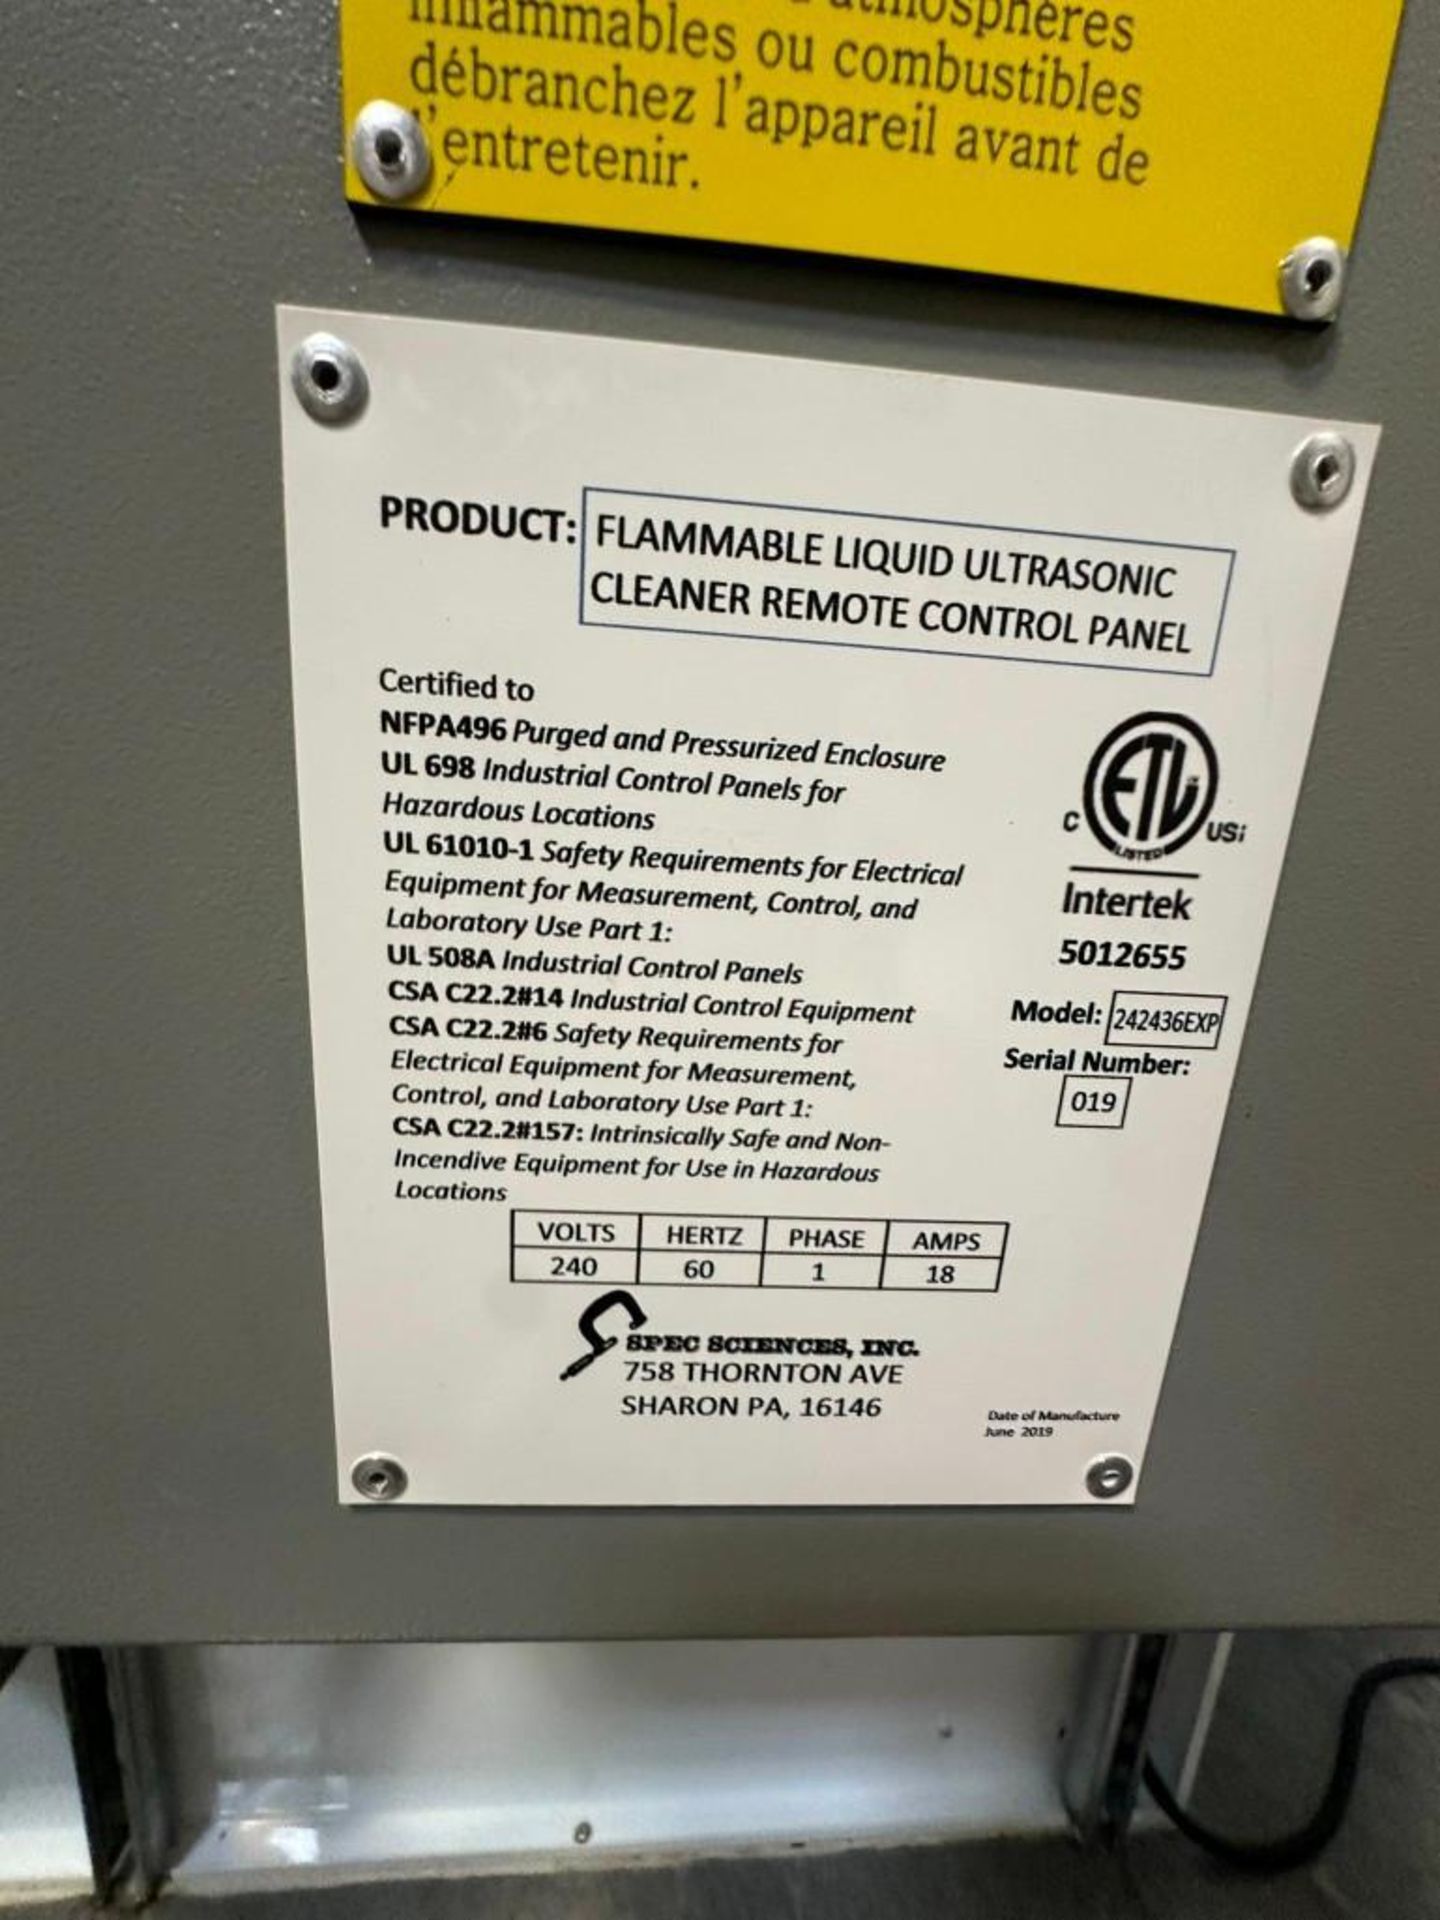 Spec Sciences Flammable Liquid Ultrasonic Cleaner Model 242436, S/N 00619150, with Control Panel and - Image 13 of 14